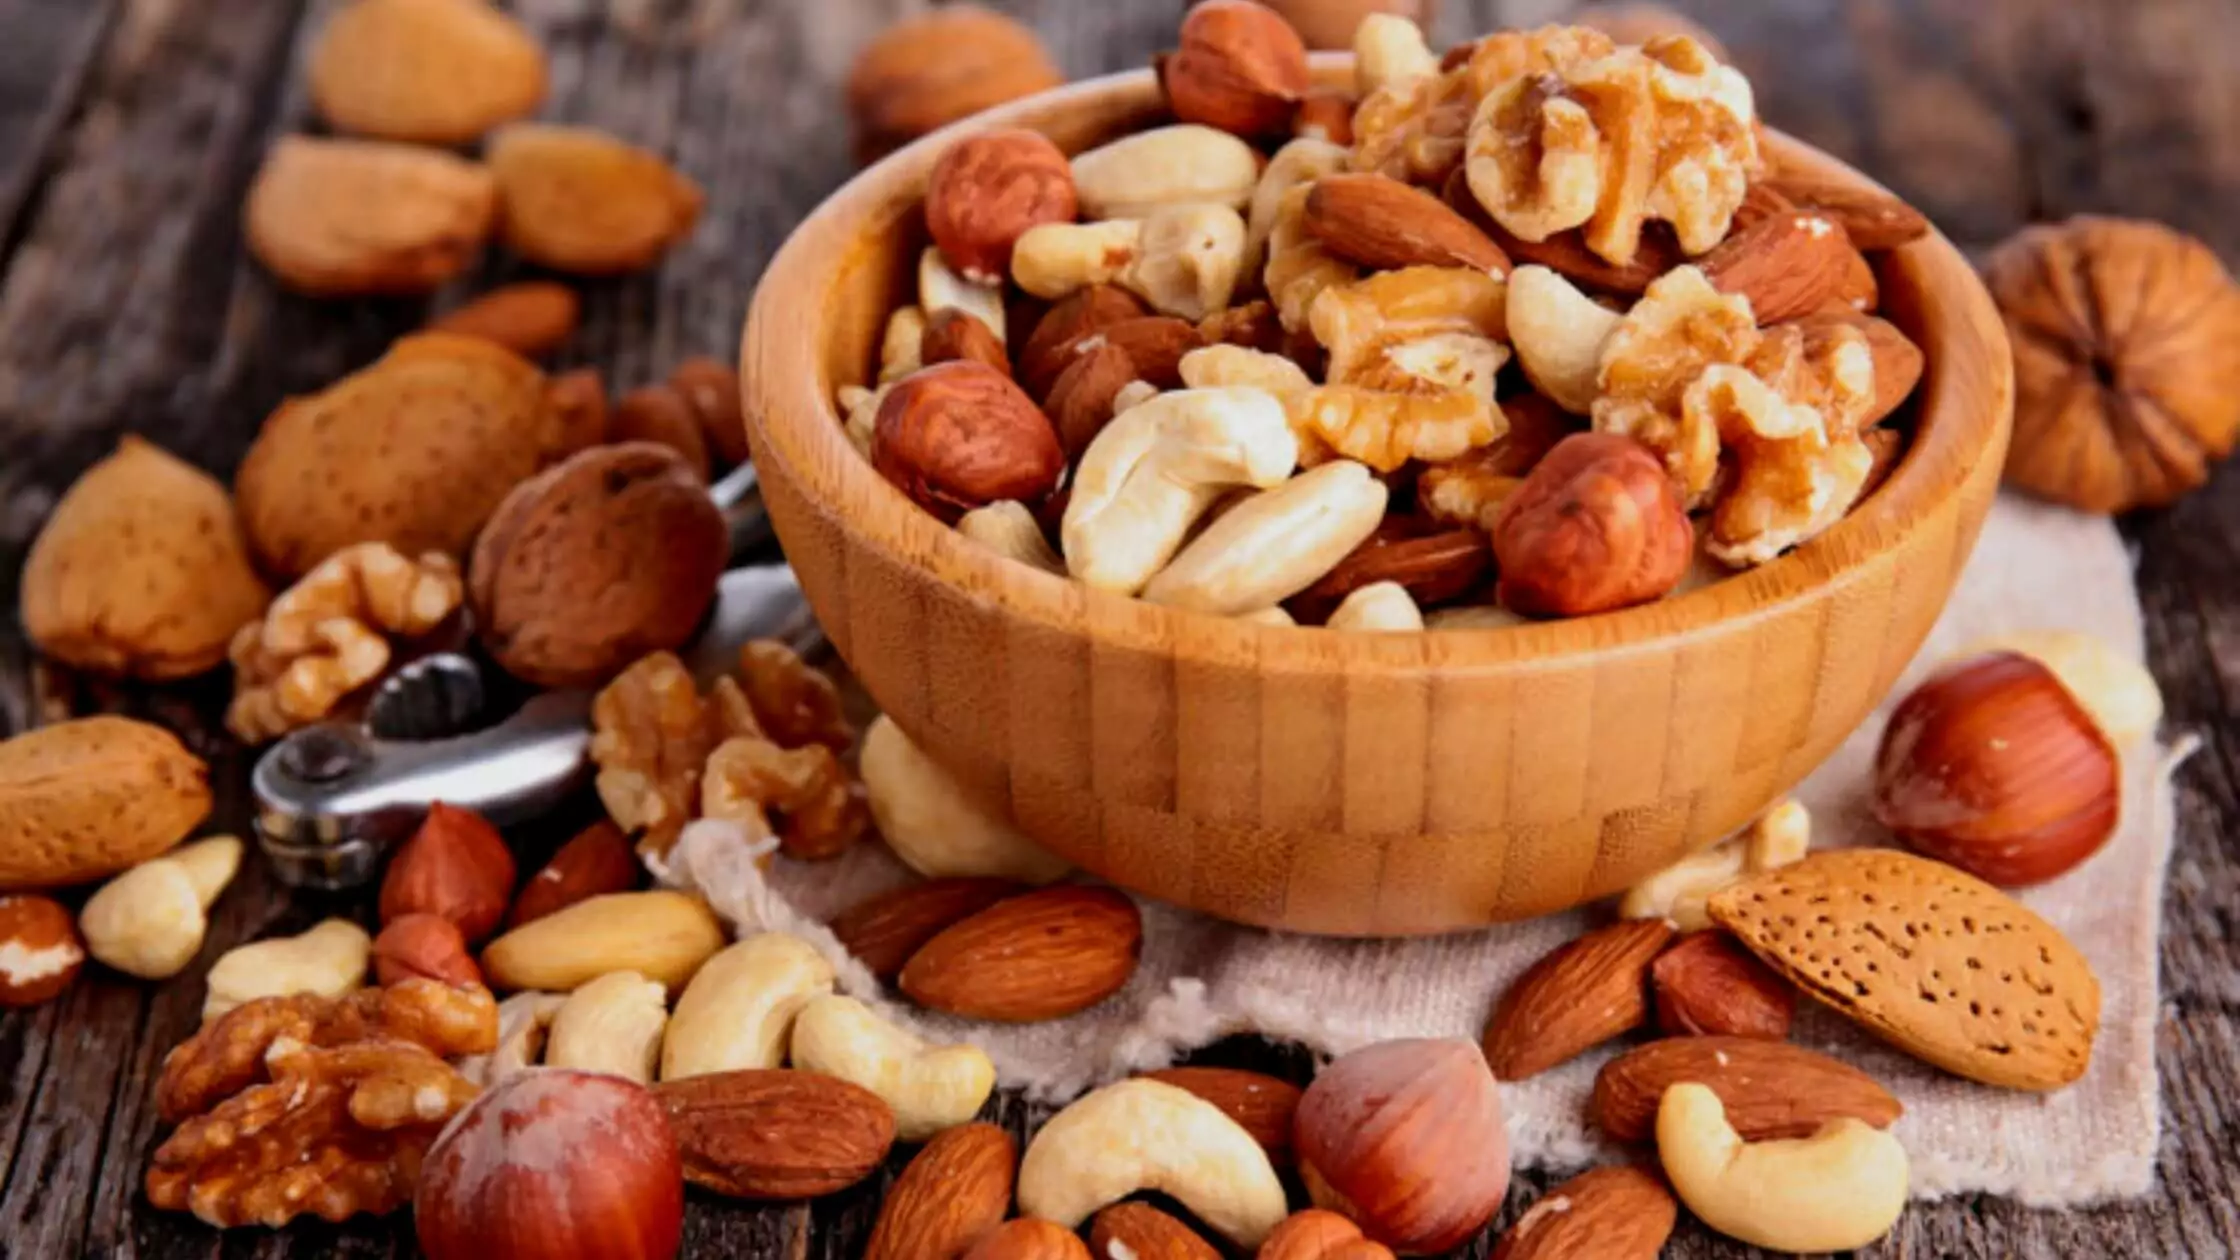 Can Eating Too Many Nuts Raise Cholesterol